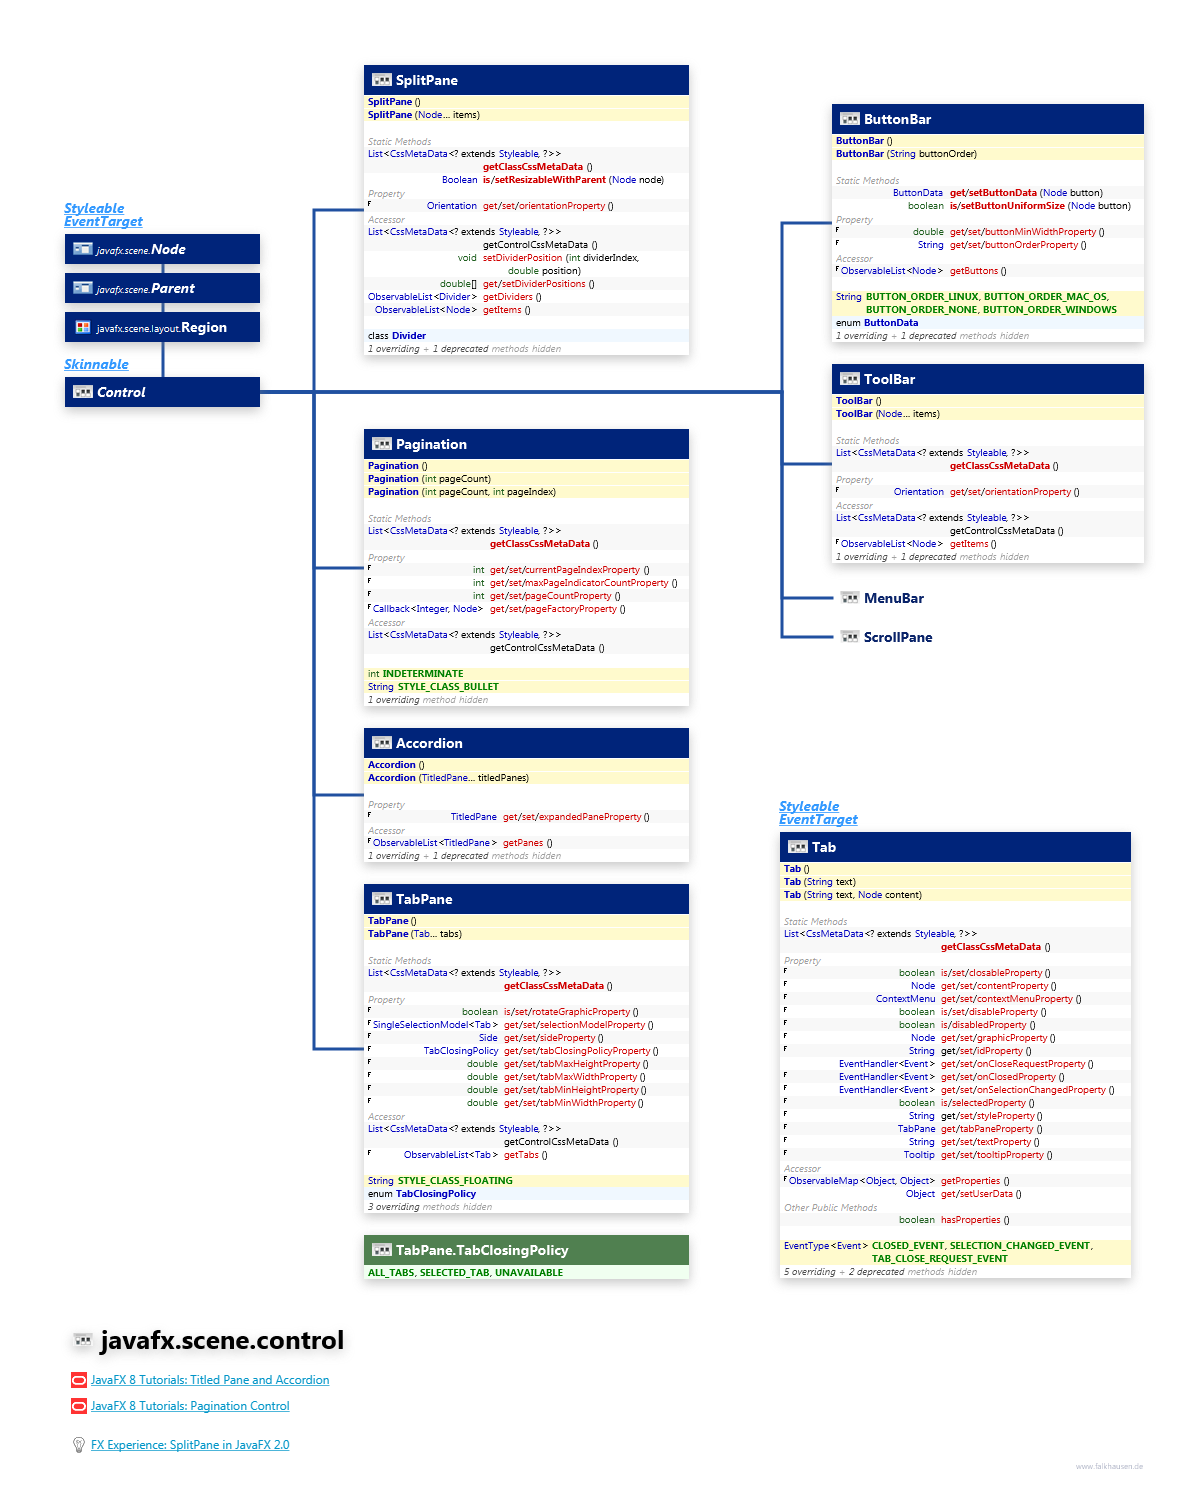 javafx.scene.control Container class diagram and api documentation for JavaFX 8